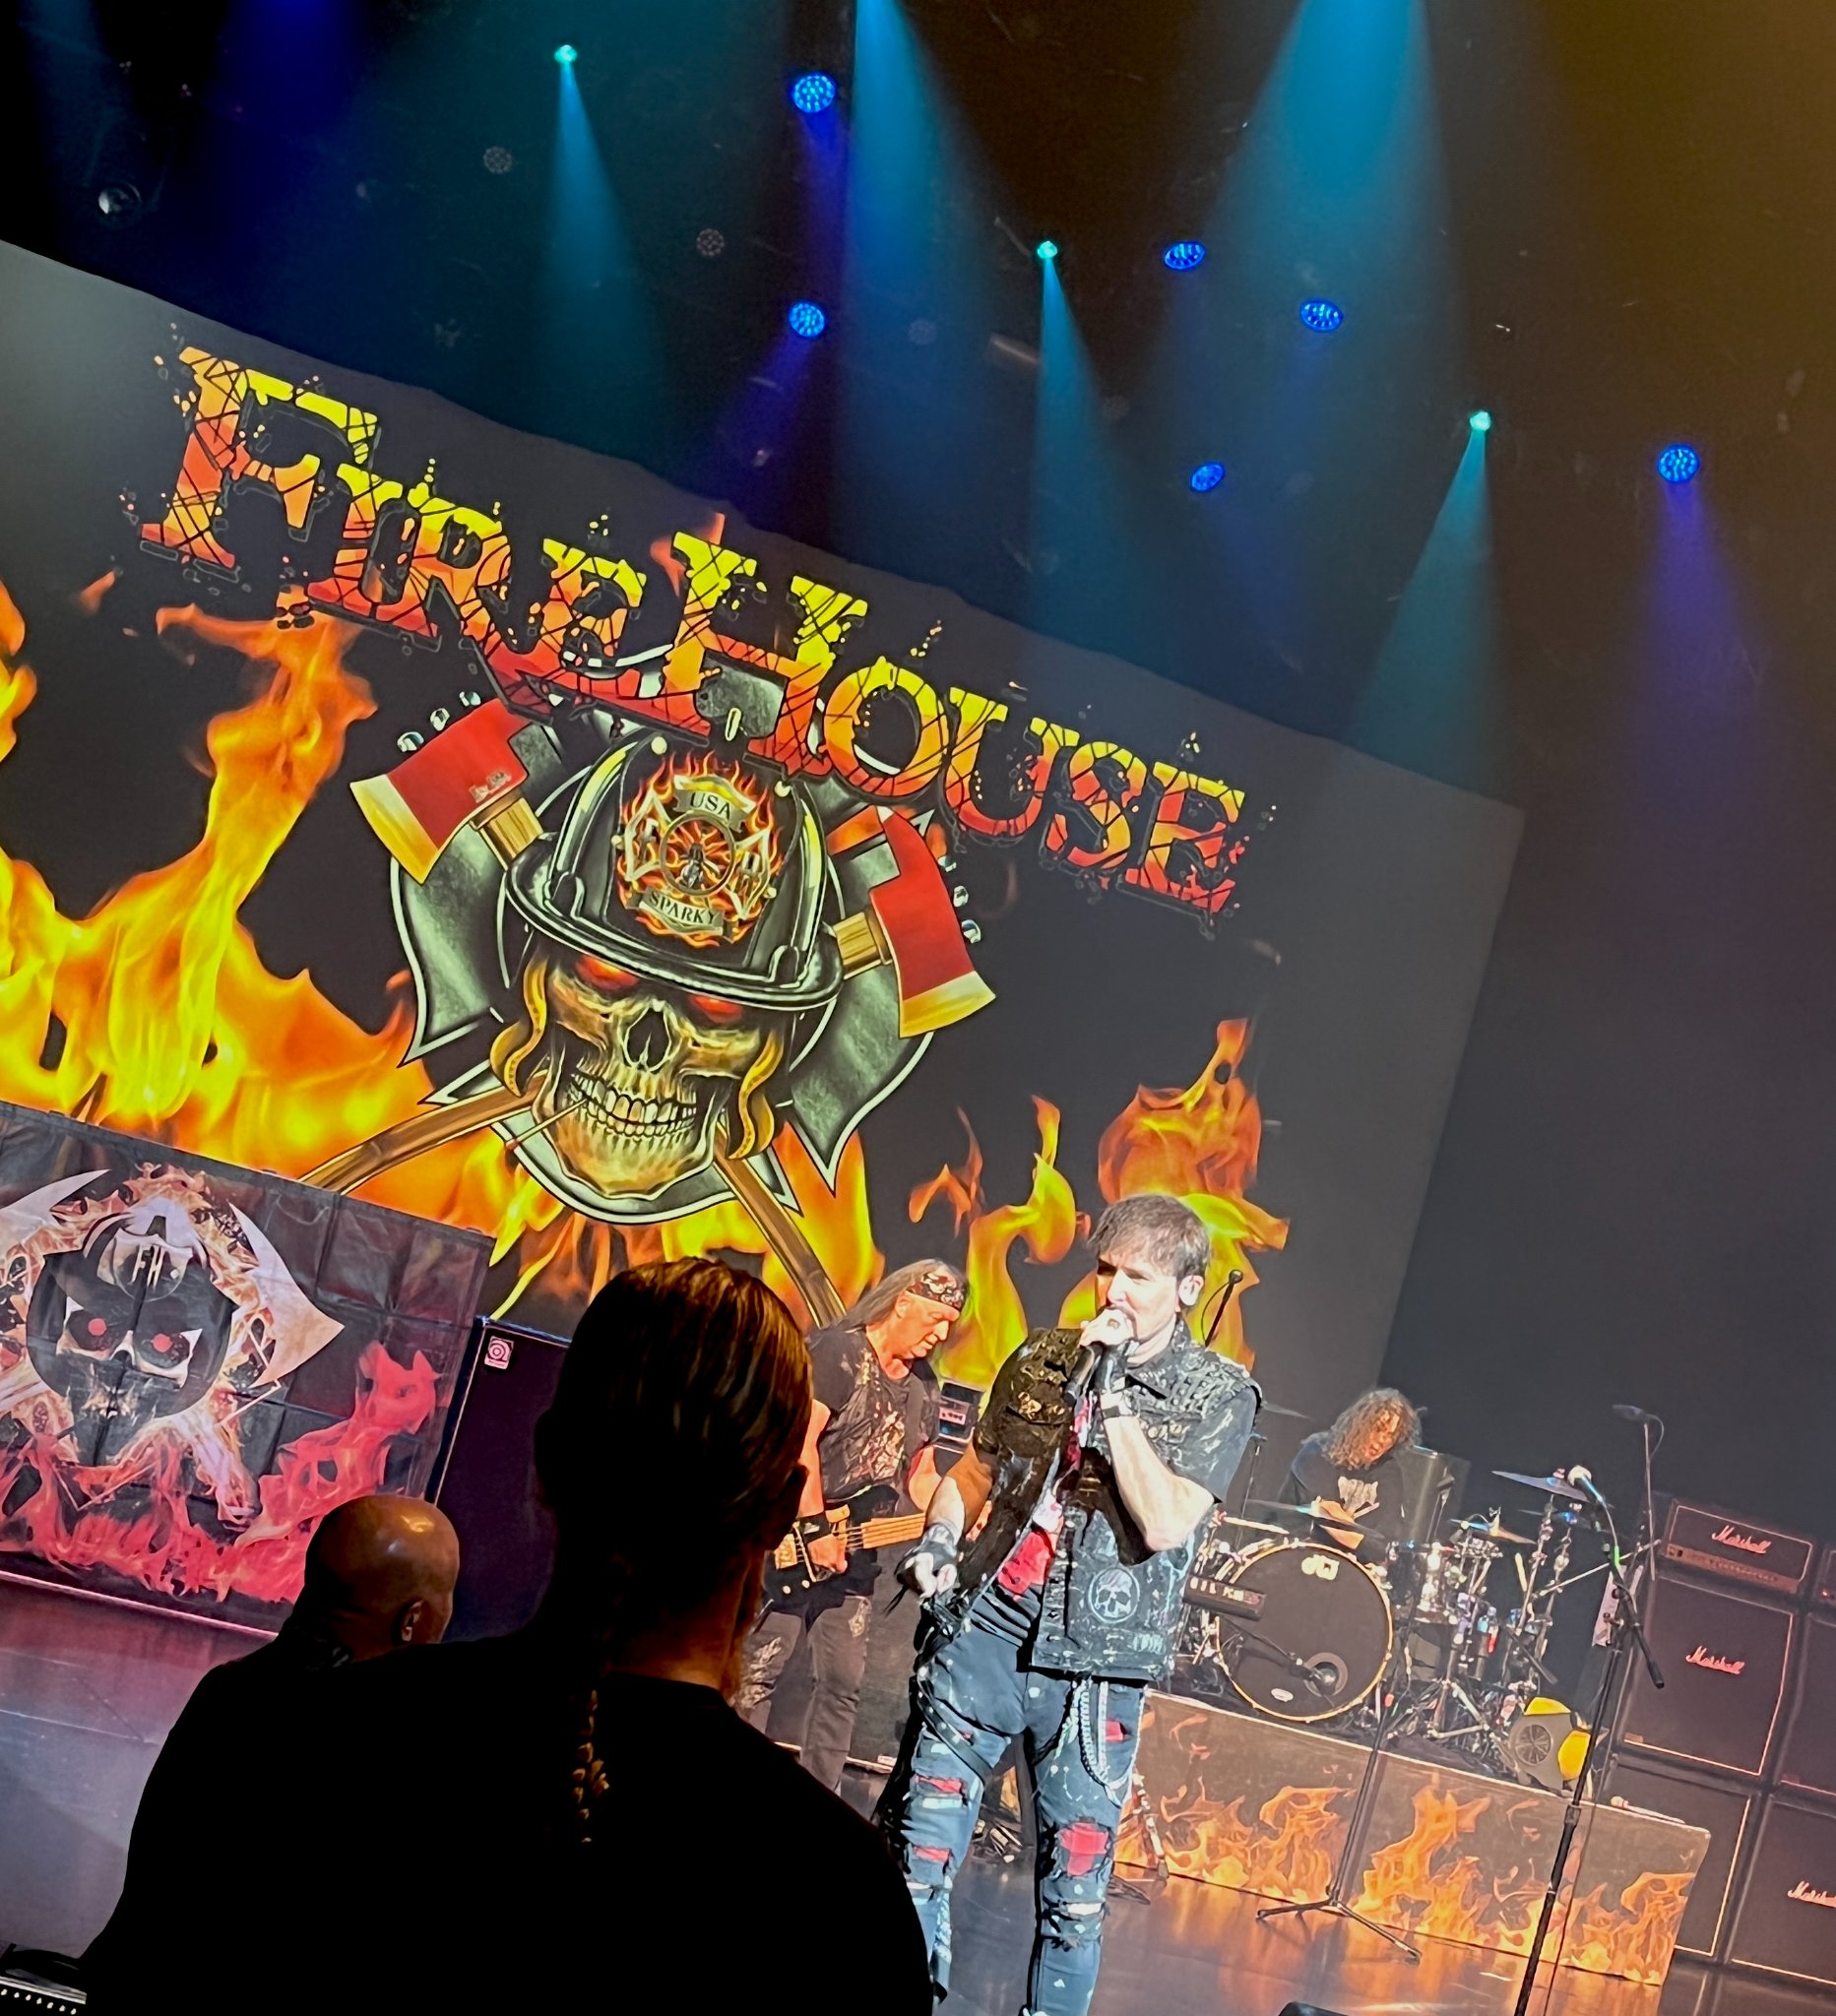 FireHouse concert review International Theater, Westgate, August 13